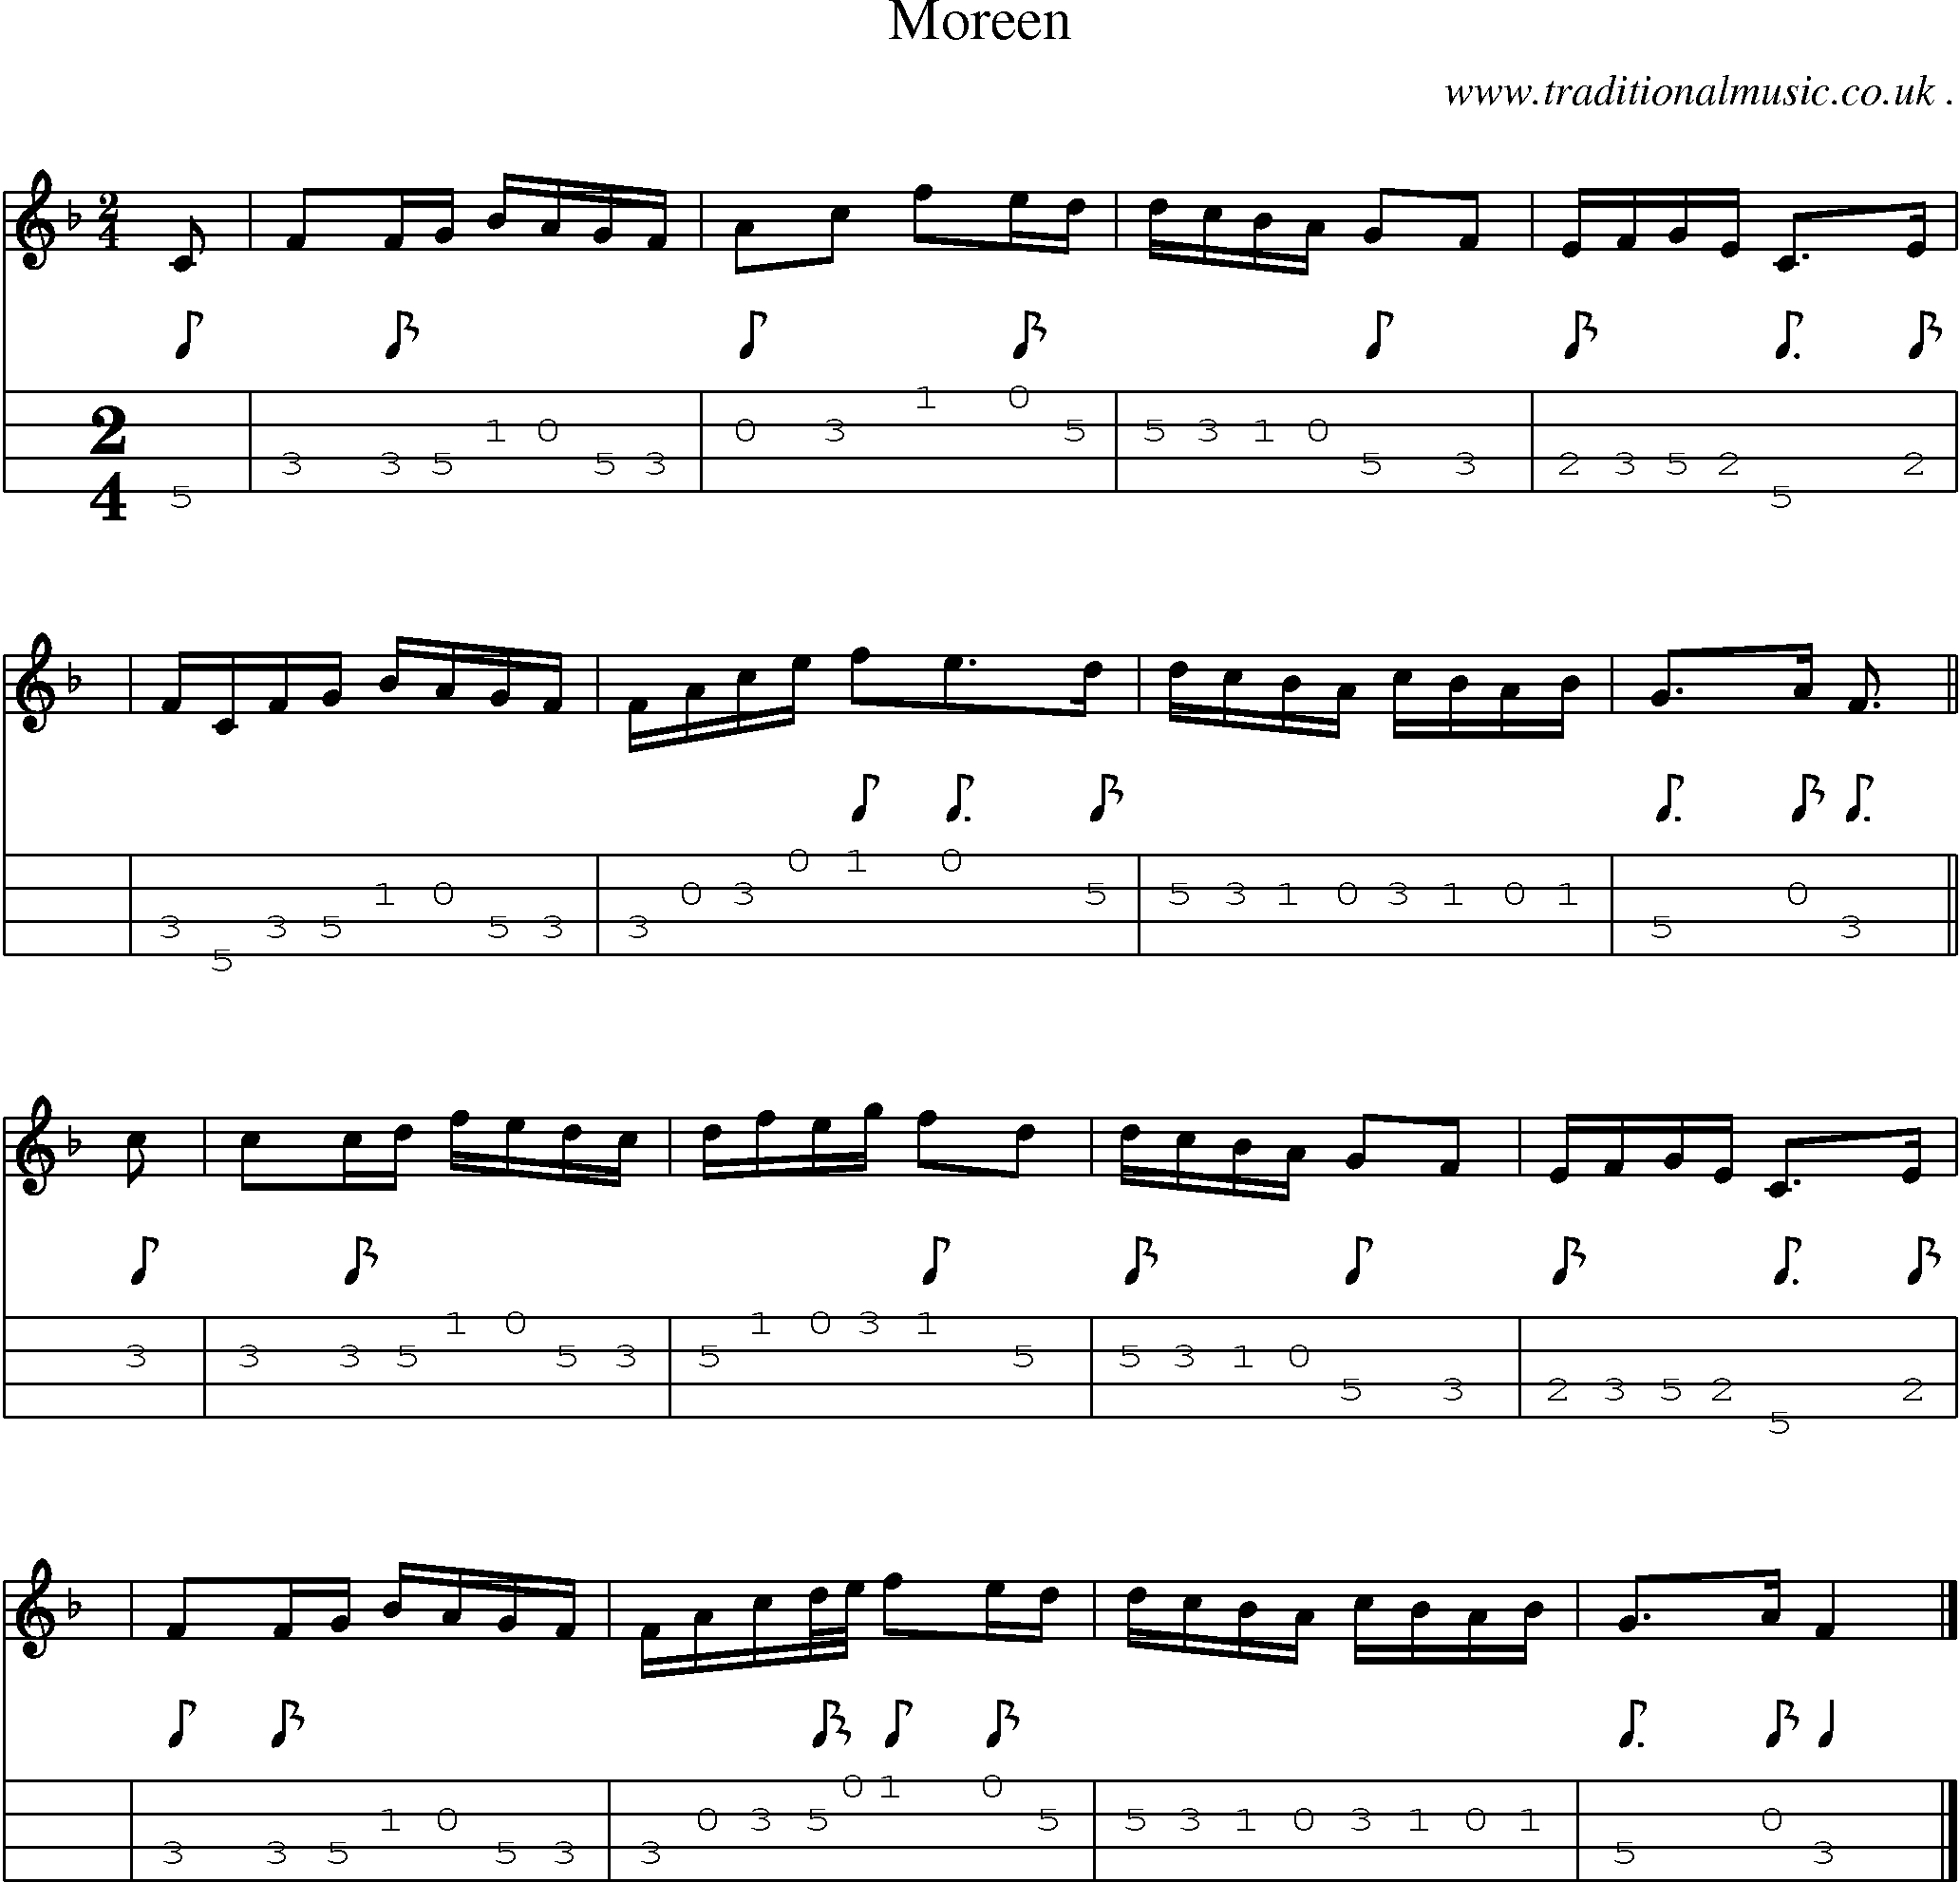 Sheet-music  score, Chords and Mandolin Tabs for Moreen